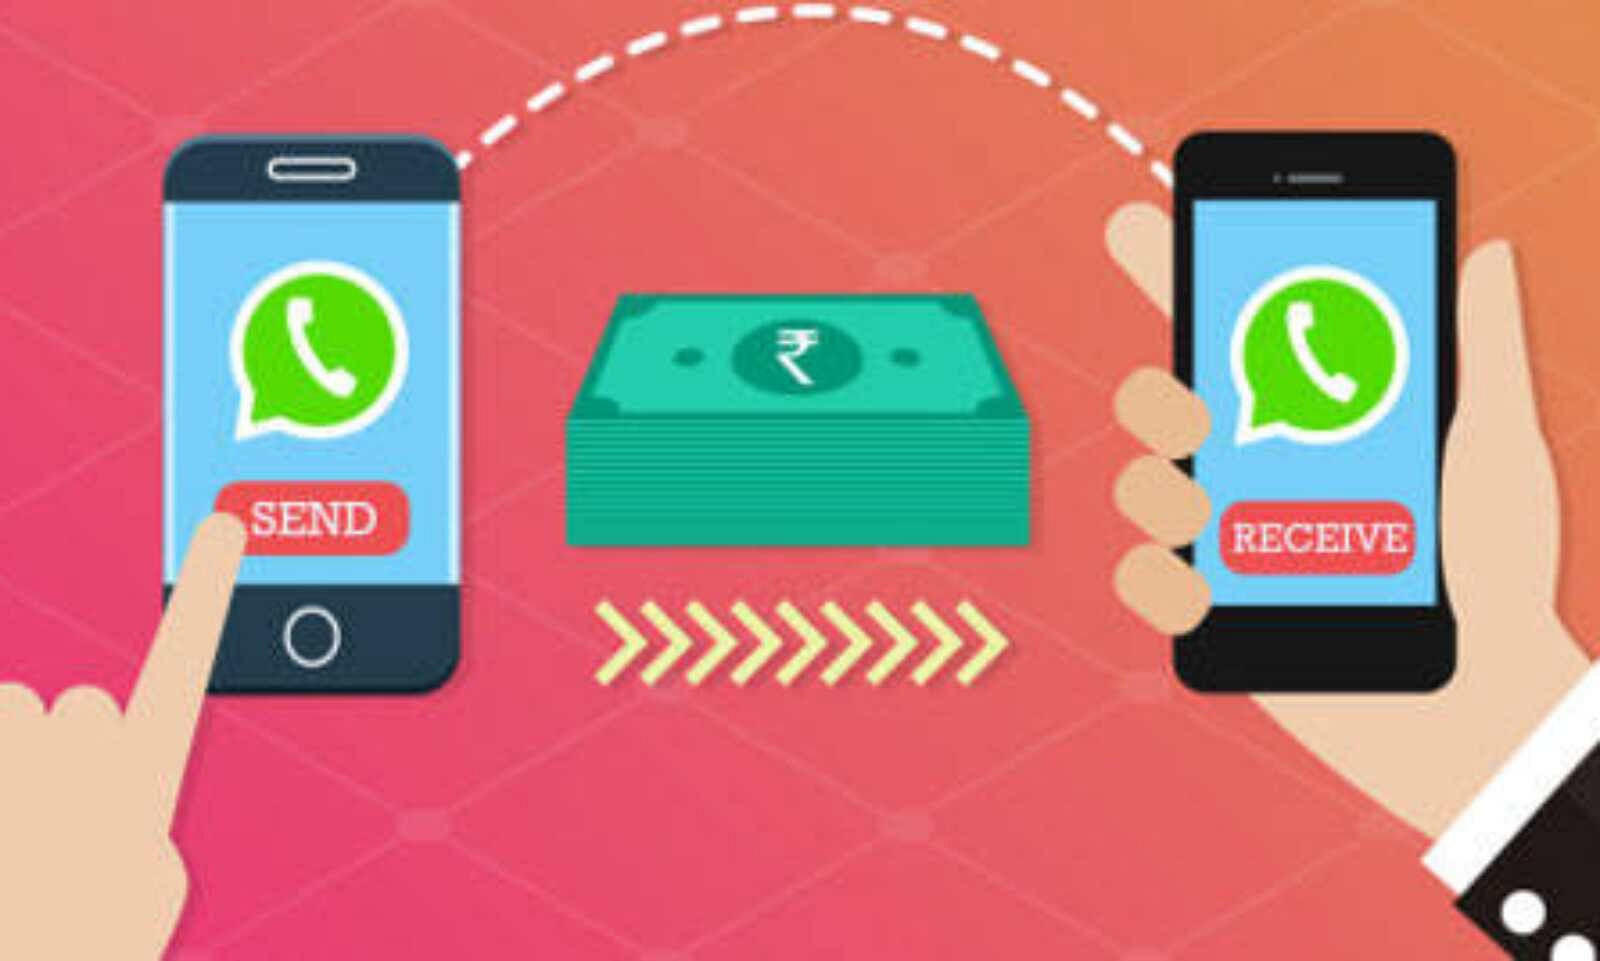 India: WhatsApp users can now send money through the app